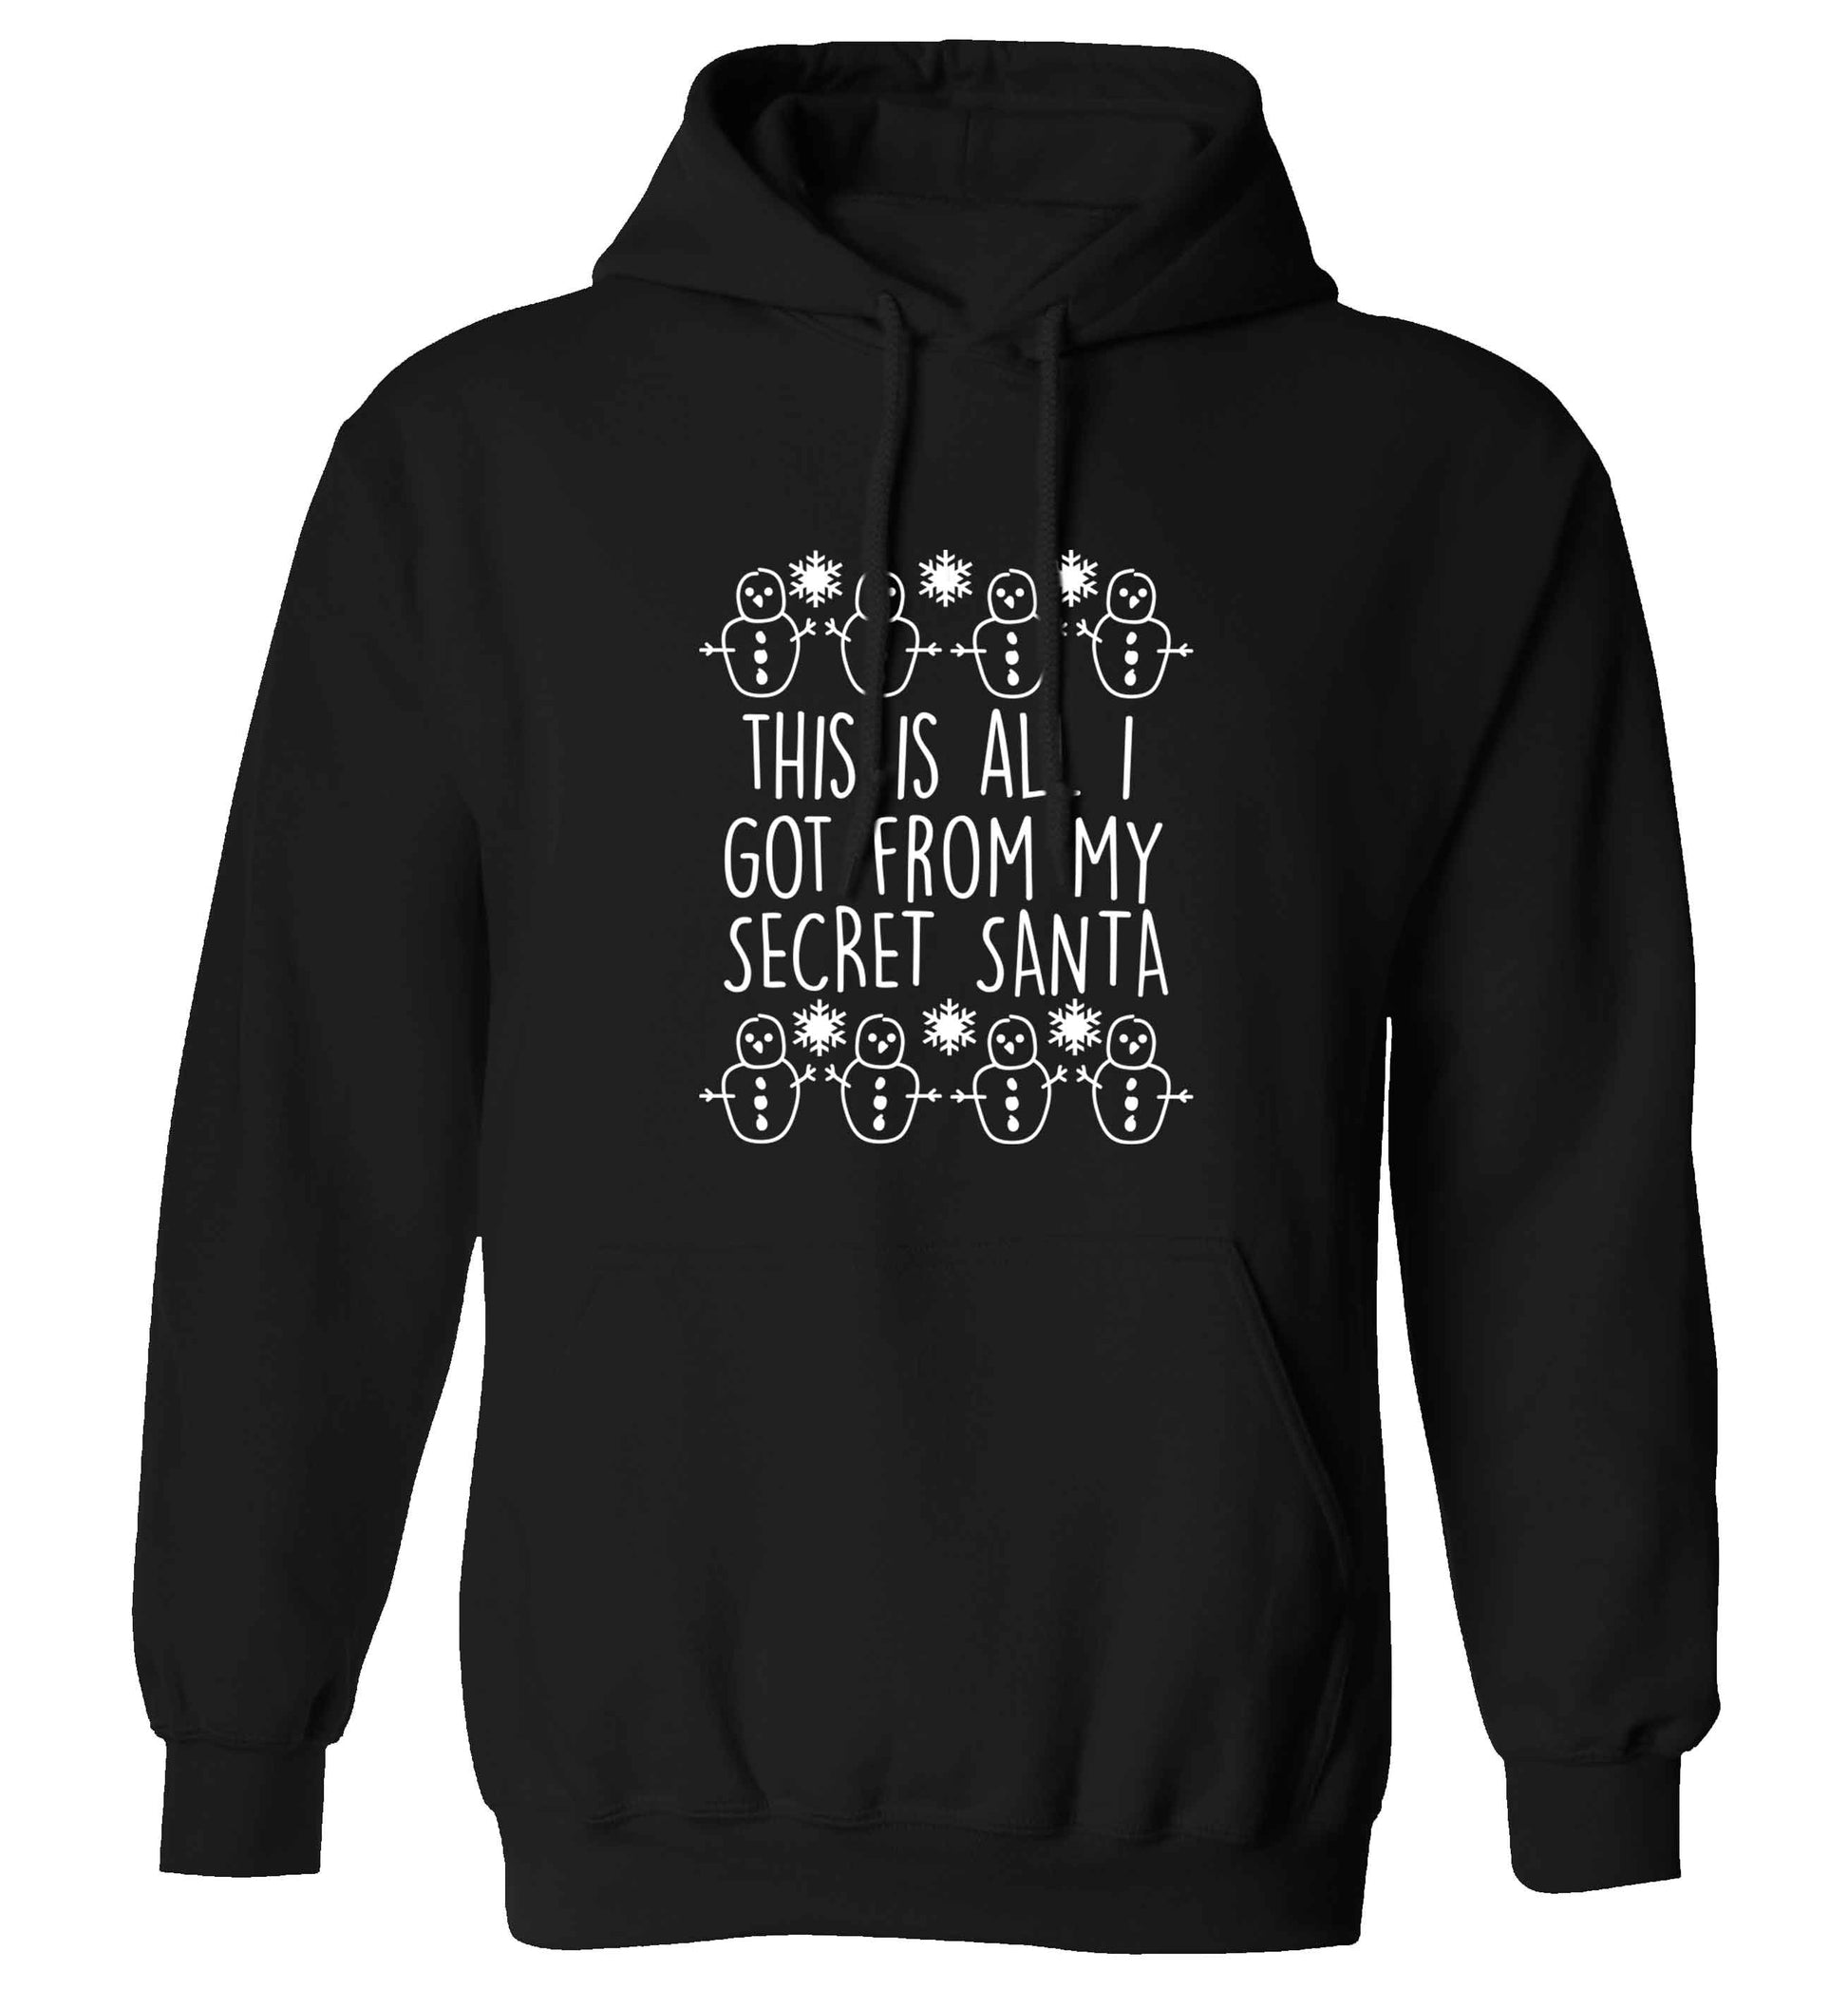 This is all I got from my secret Santa adults unisex black hoodie 2XL